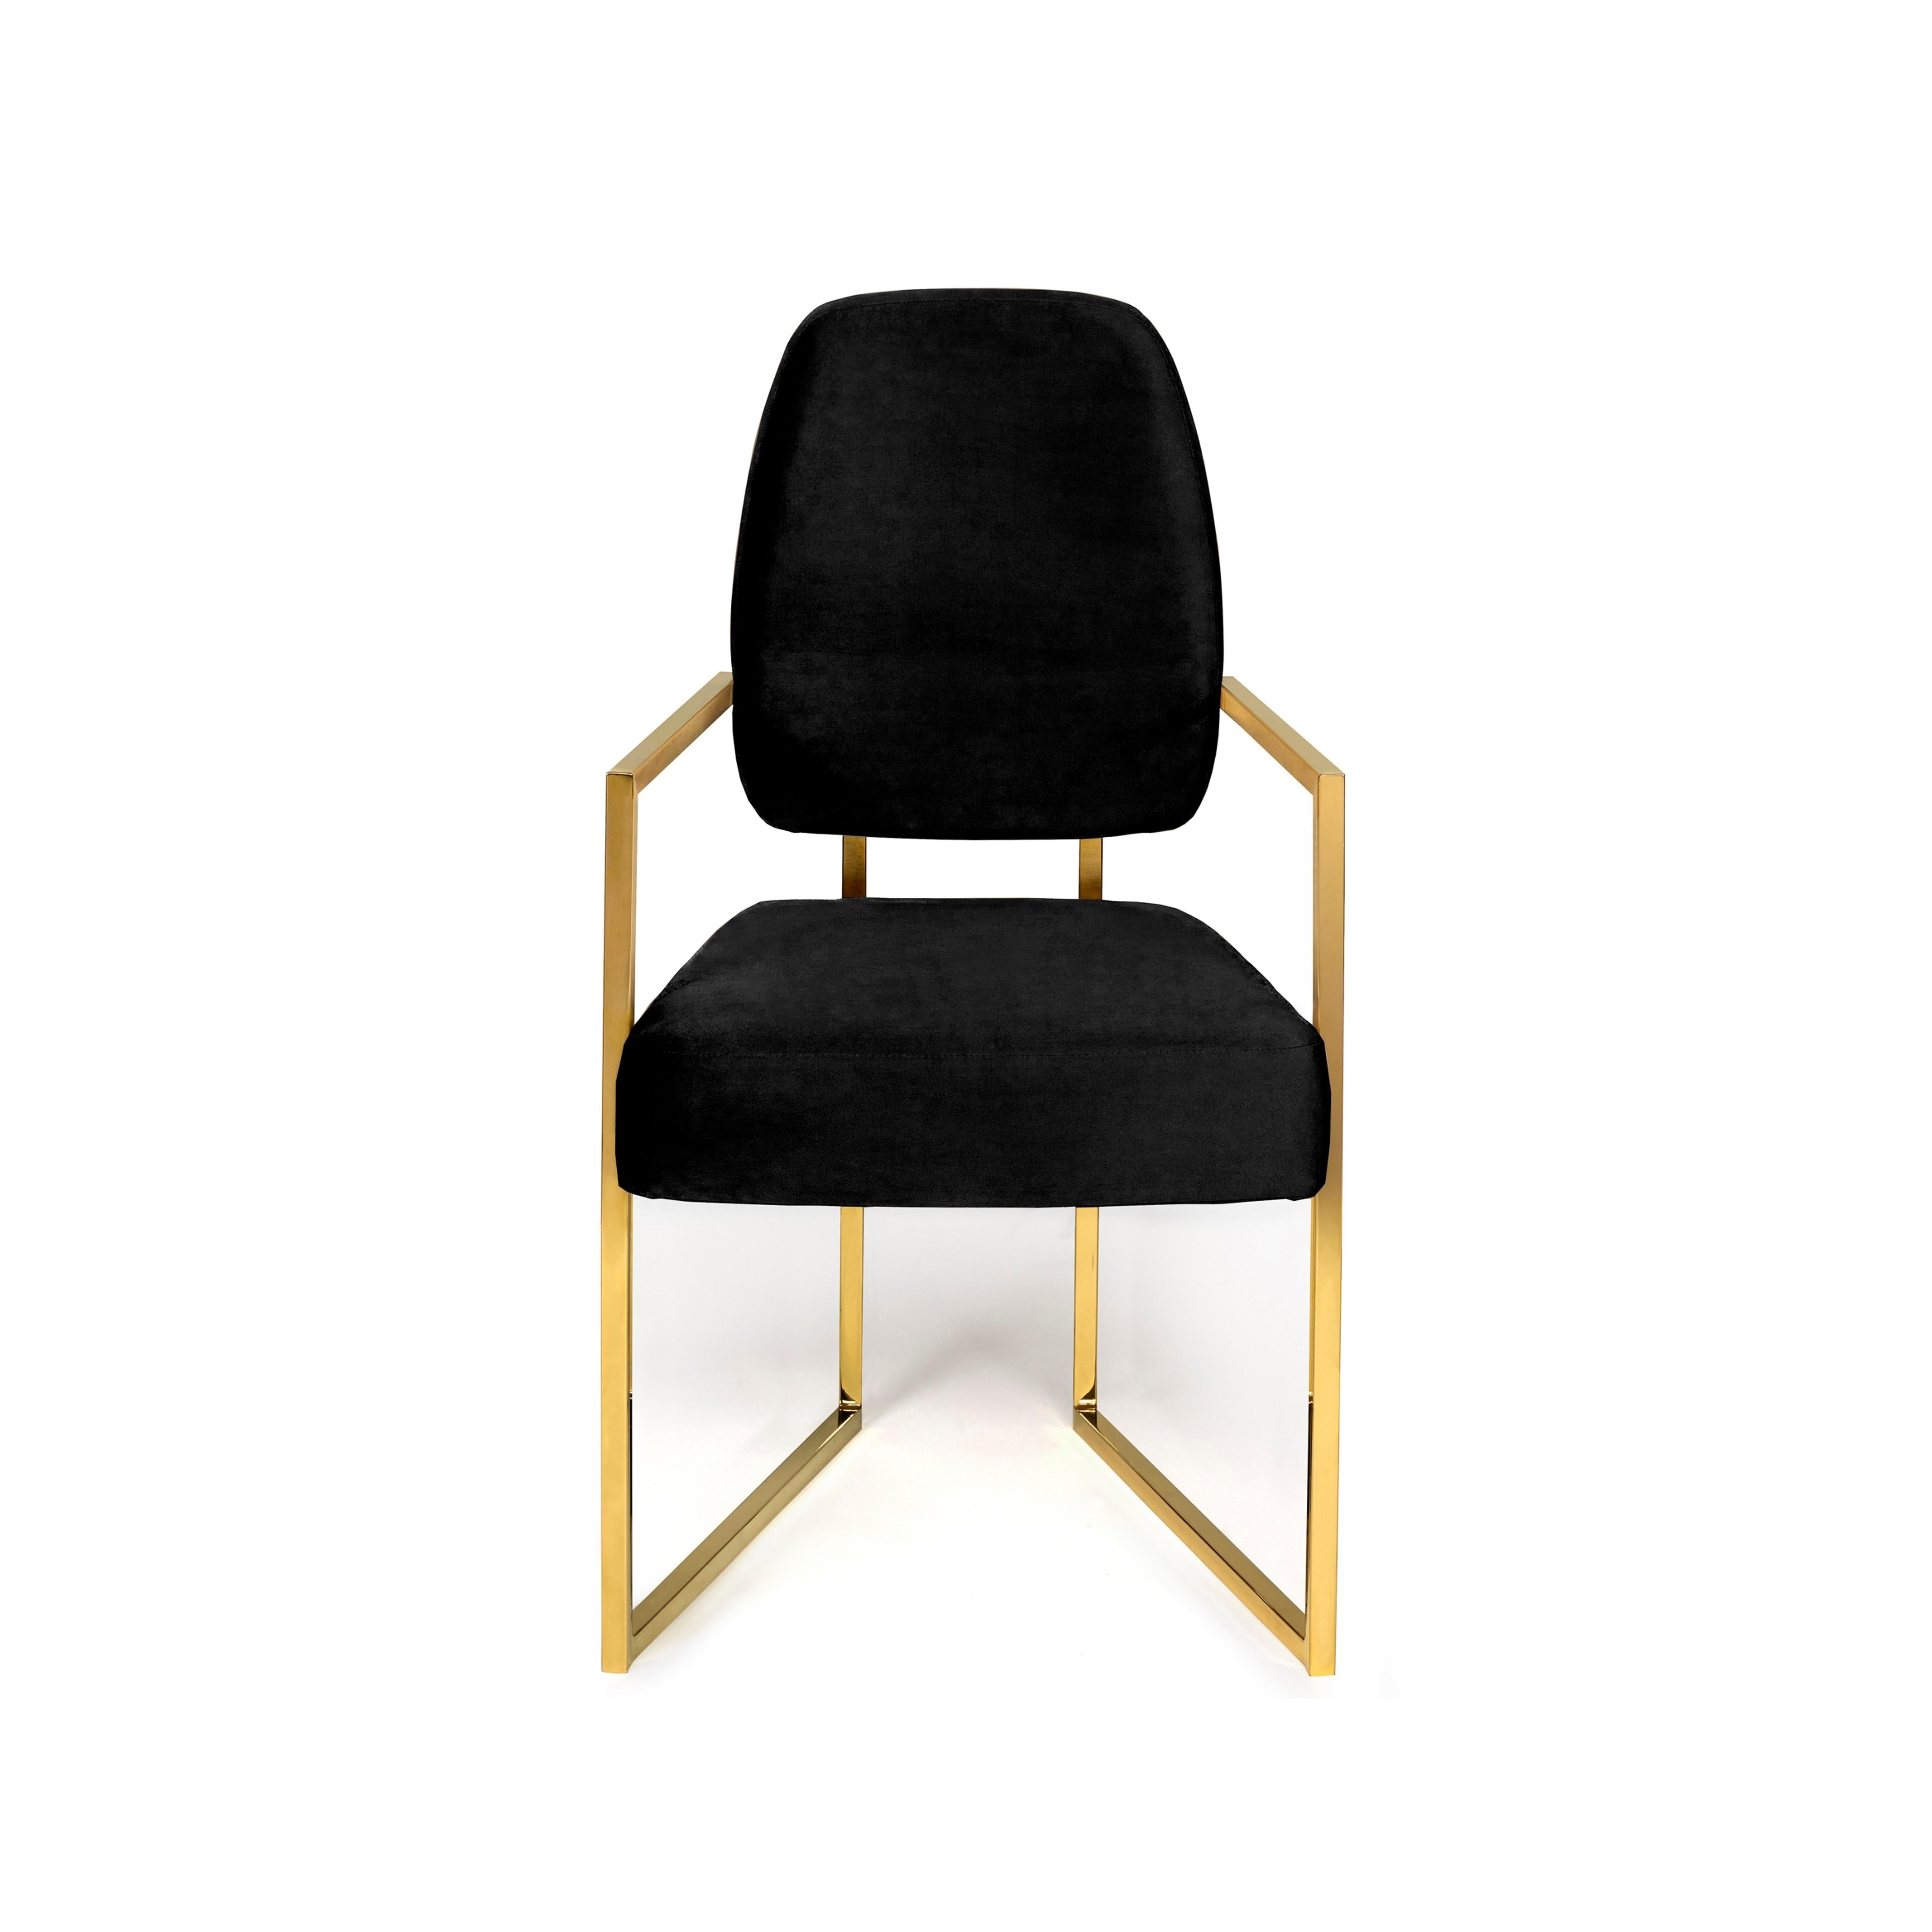 Hand-Crafted Perspective Dining Chair, COM, InsidherLand by Joana Santos Barbosa For Sale